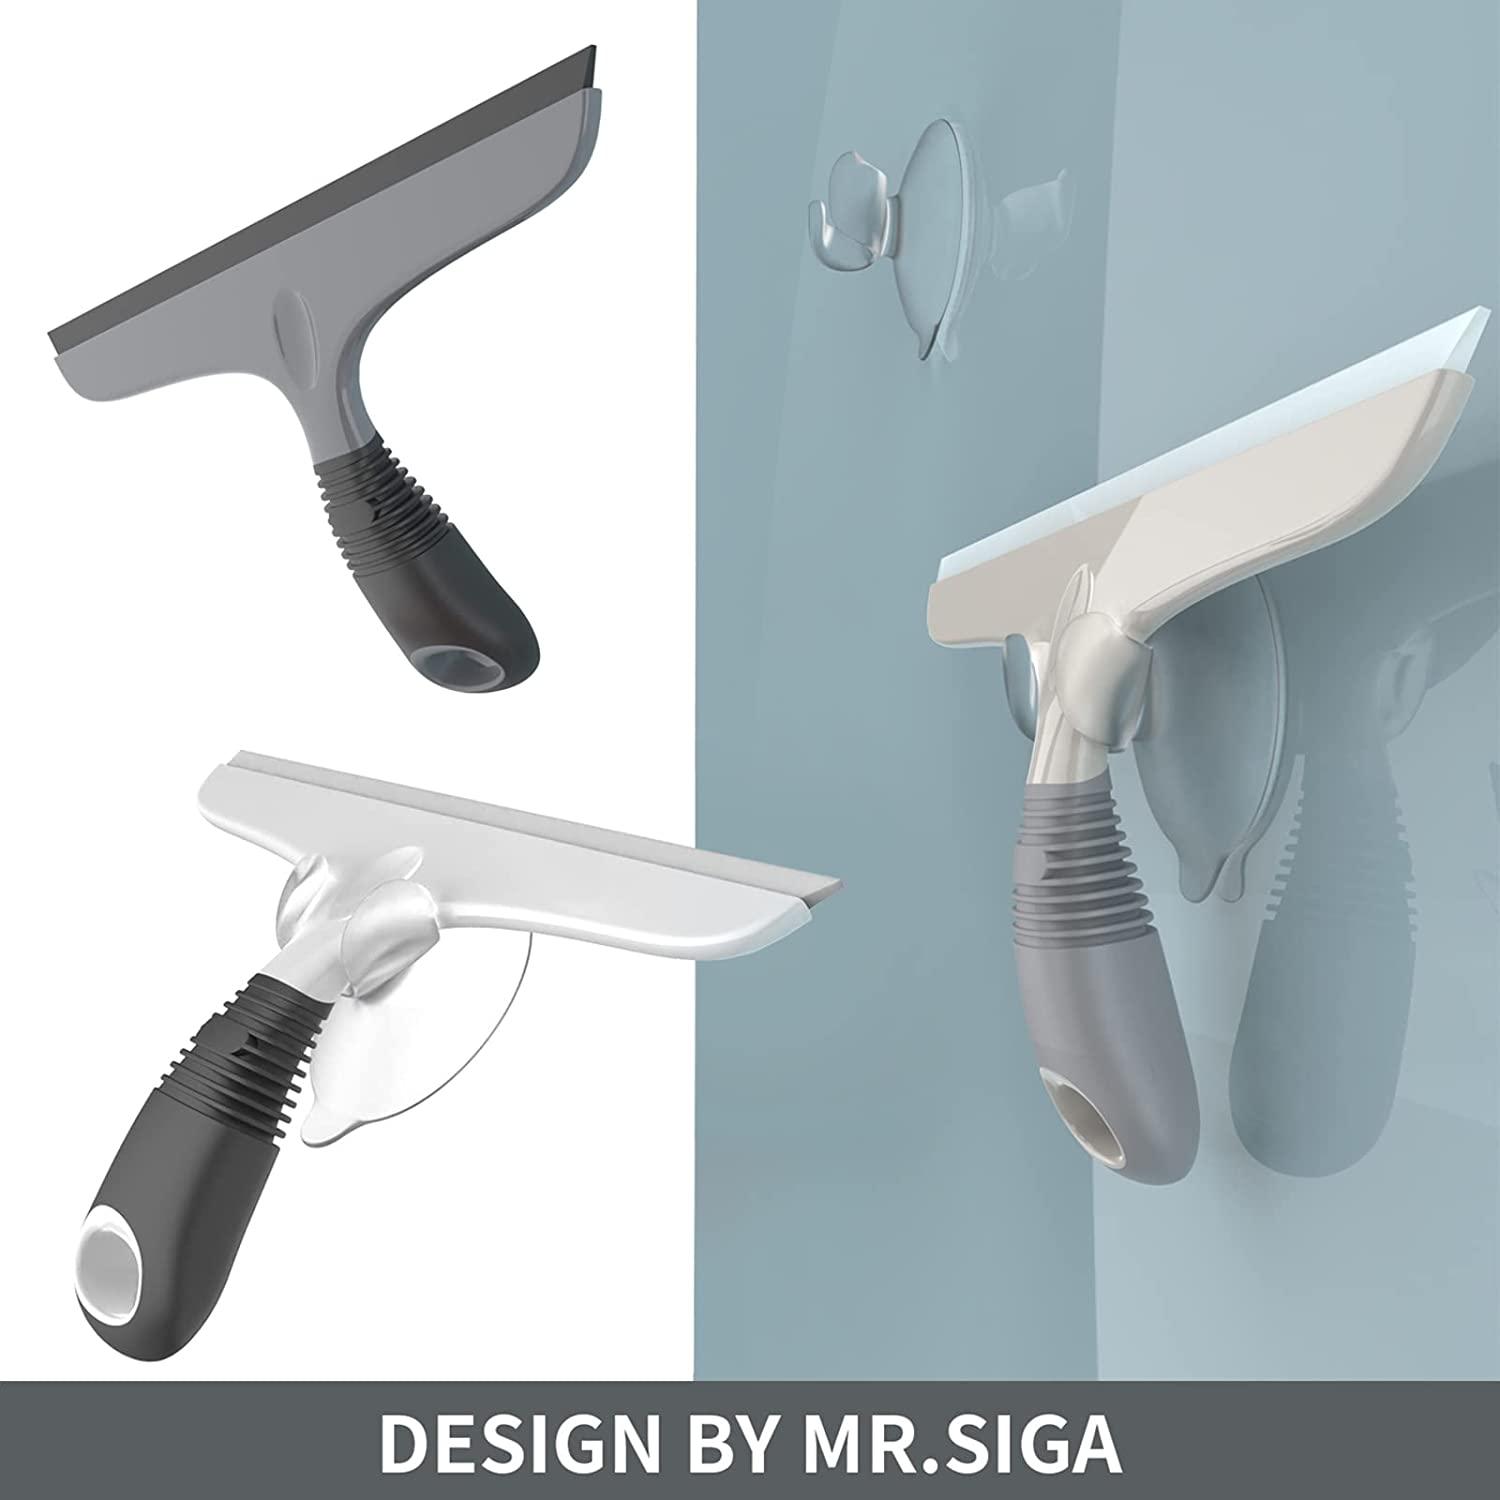 MR.SIGA Multi-Purpose Silicon Squeegee for Window, Glass, Shower Door, Car  Windshield, Heavy Duty Window Scrubber, Includes Suction Hook, 10 inch,  White & Grey, 1 Pack